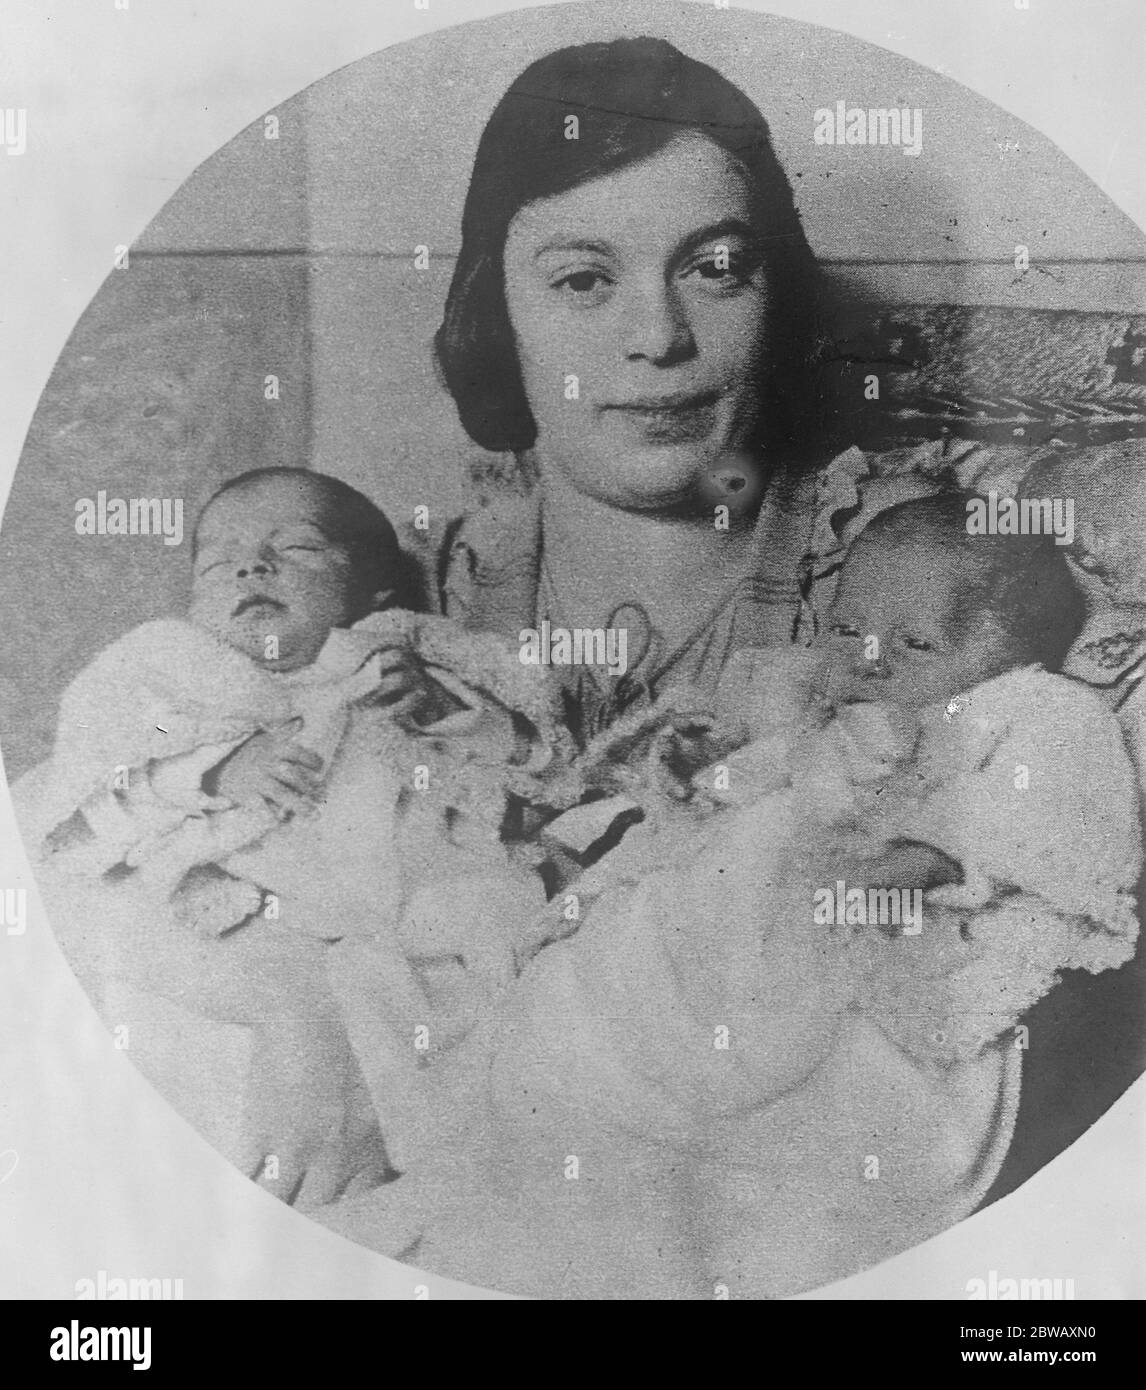 America 's  Siamese Twins  . Mrs Meyer Zarelzky , of New York City , with her twin girls who on November 22nd were born locked in bone and tissue in the region just below the neck . They were successfully separated and are now thriving . 10 January 1923 Stock Photo